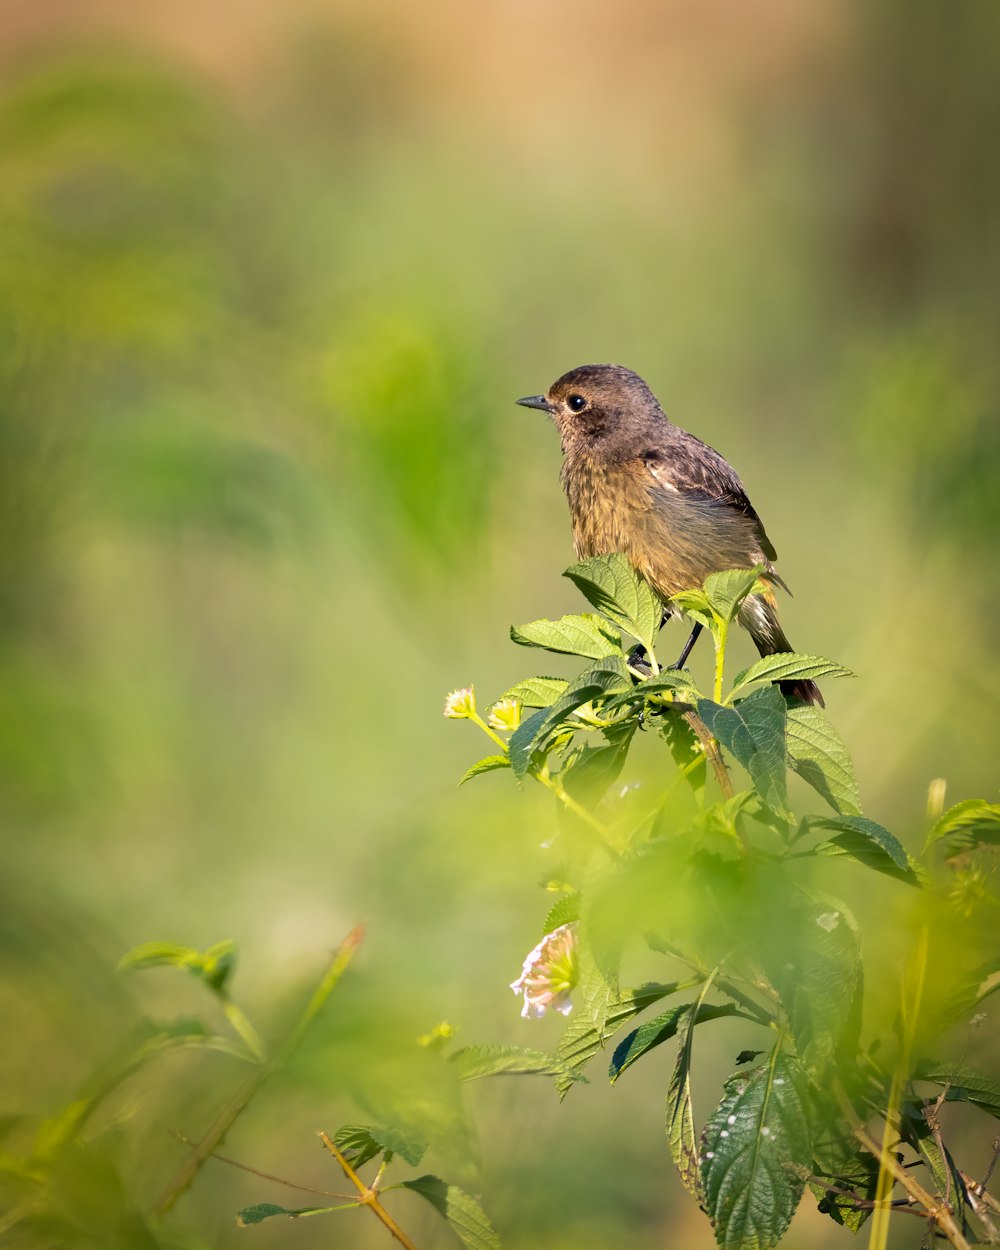 brown bird perched on green plant during daytime